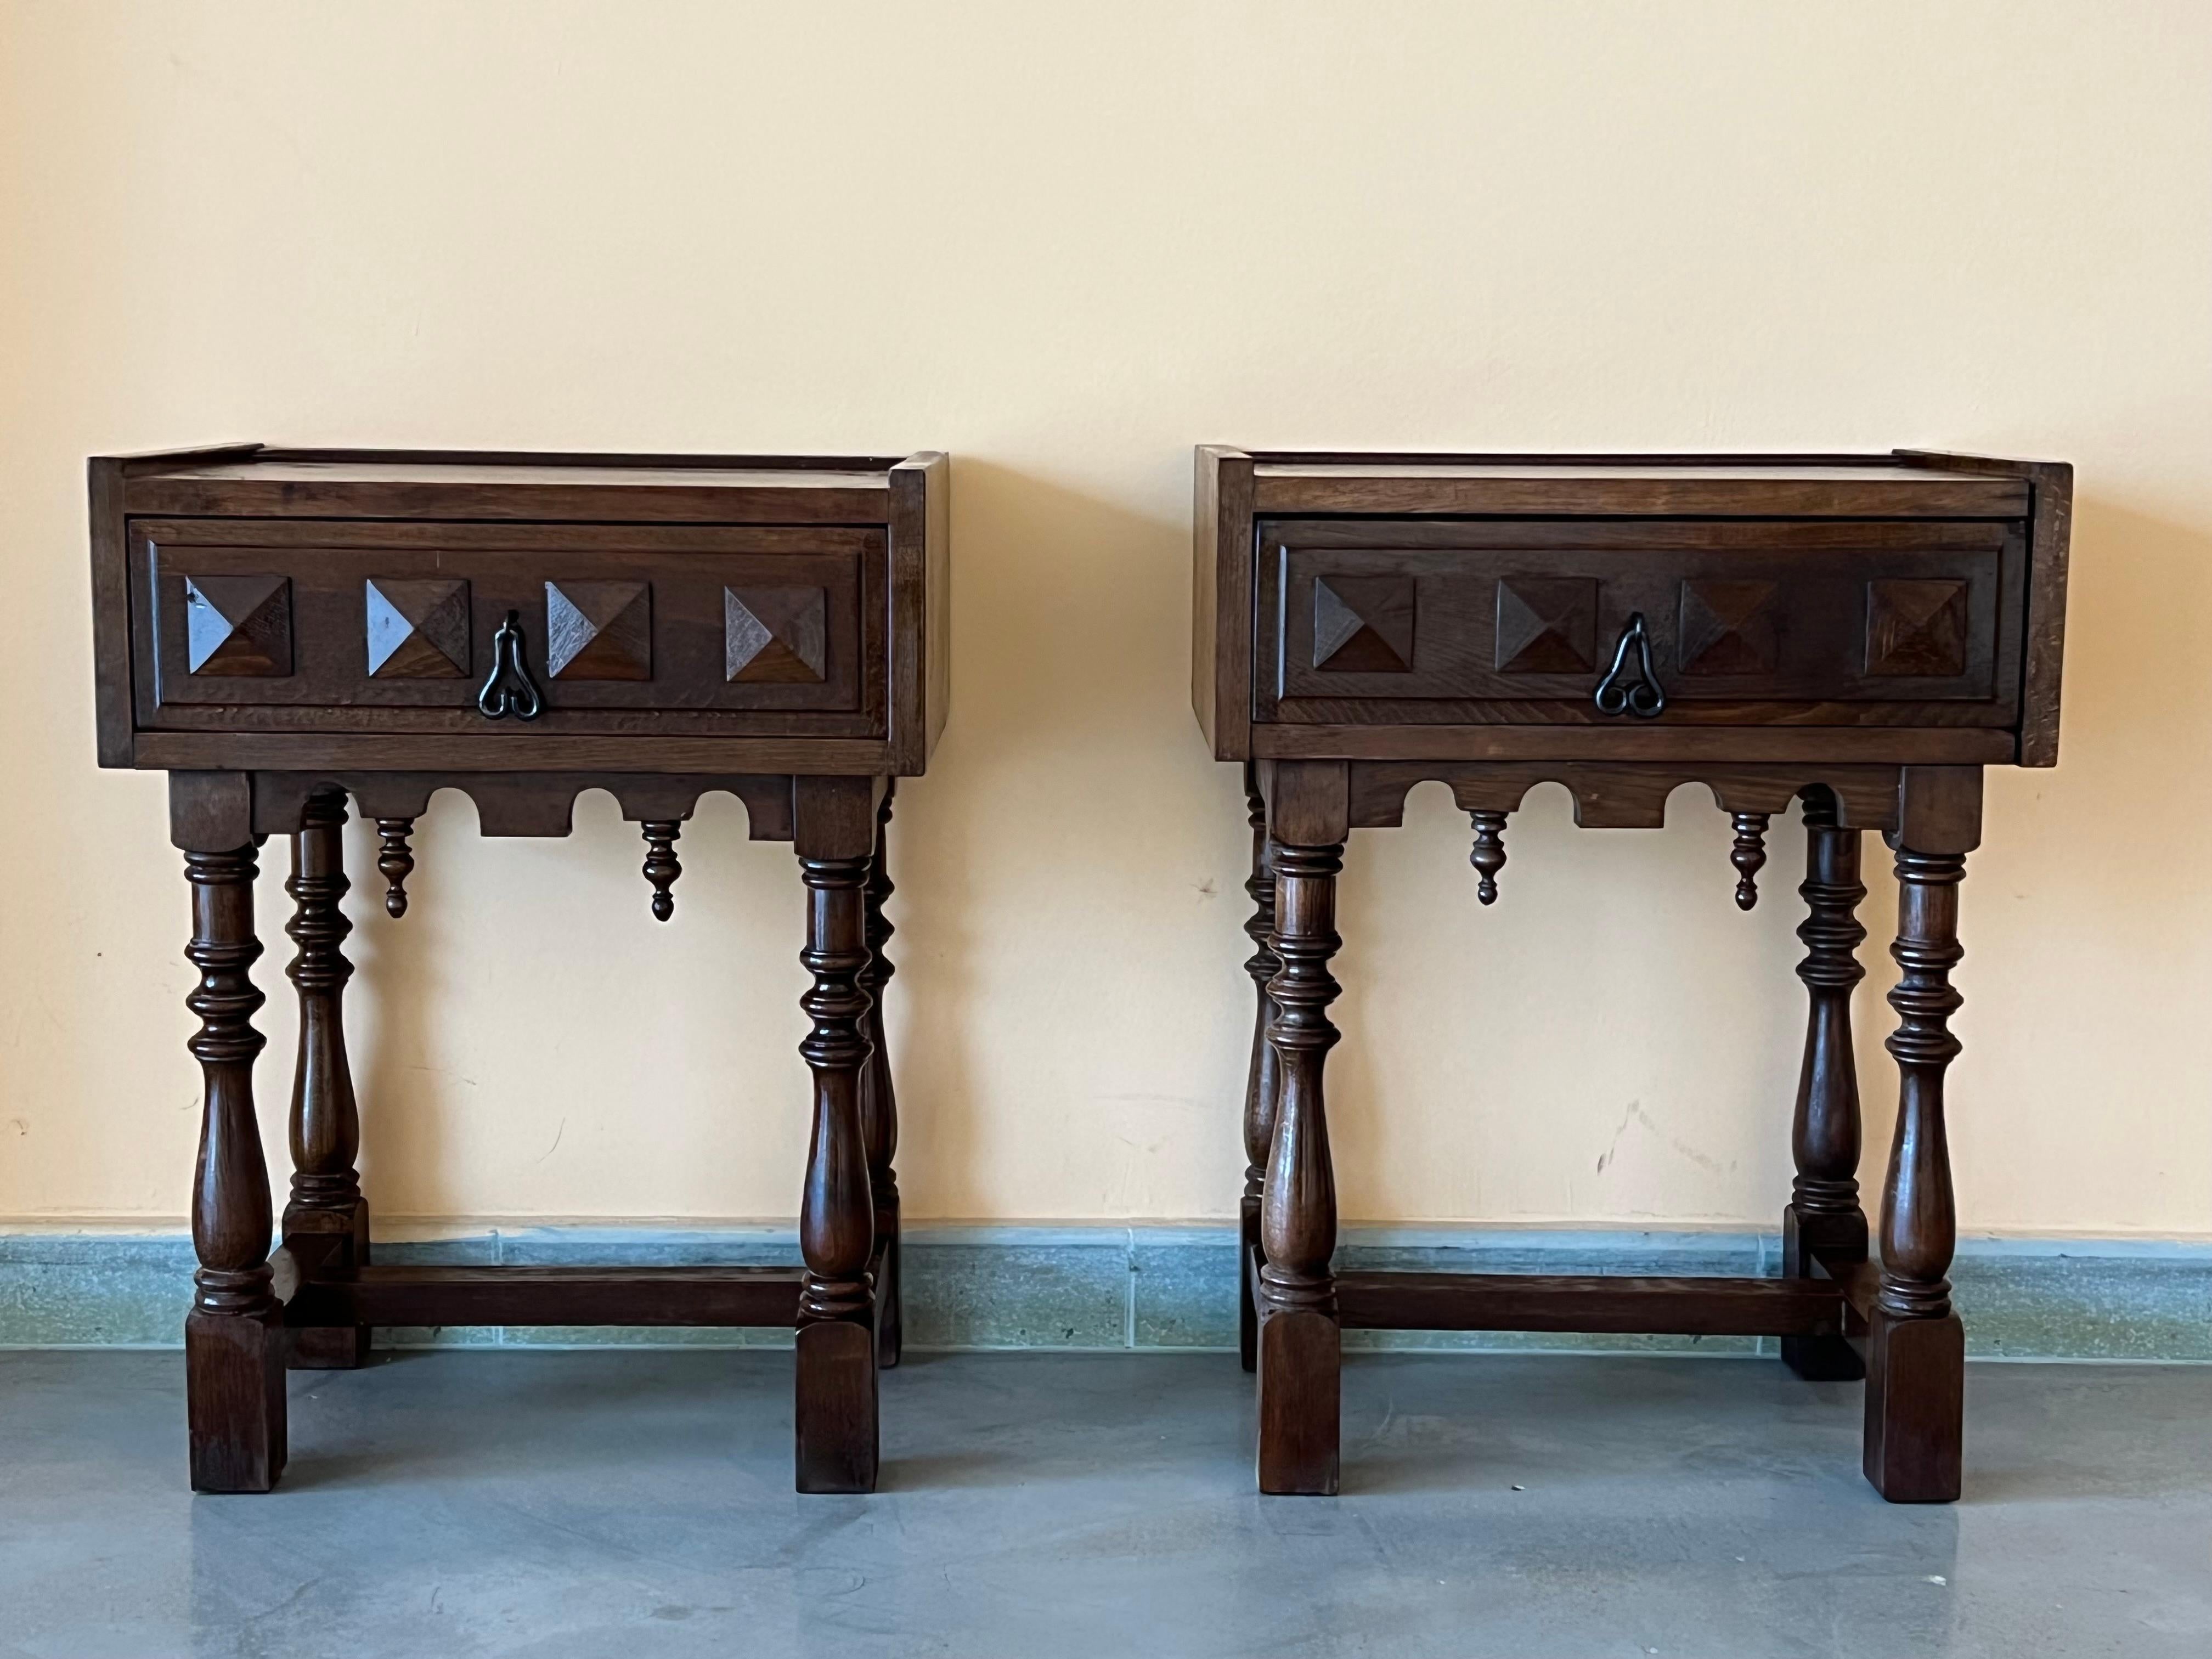 20th century pair of Catalan, Spanish nightstands with carved bars in both sides and one drawer.
The tables are made of walnut of this region
Beautiful and heavy nightstands.
  